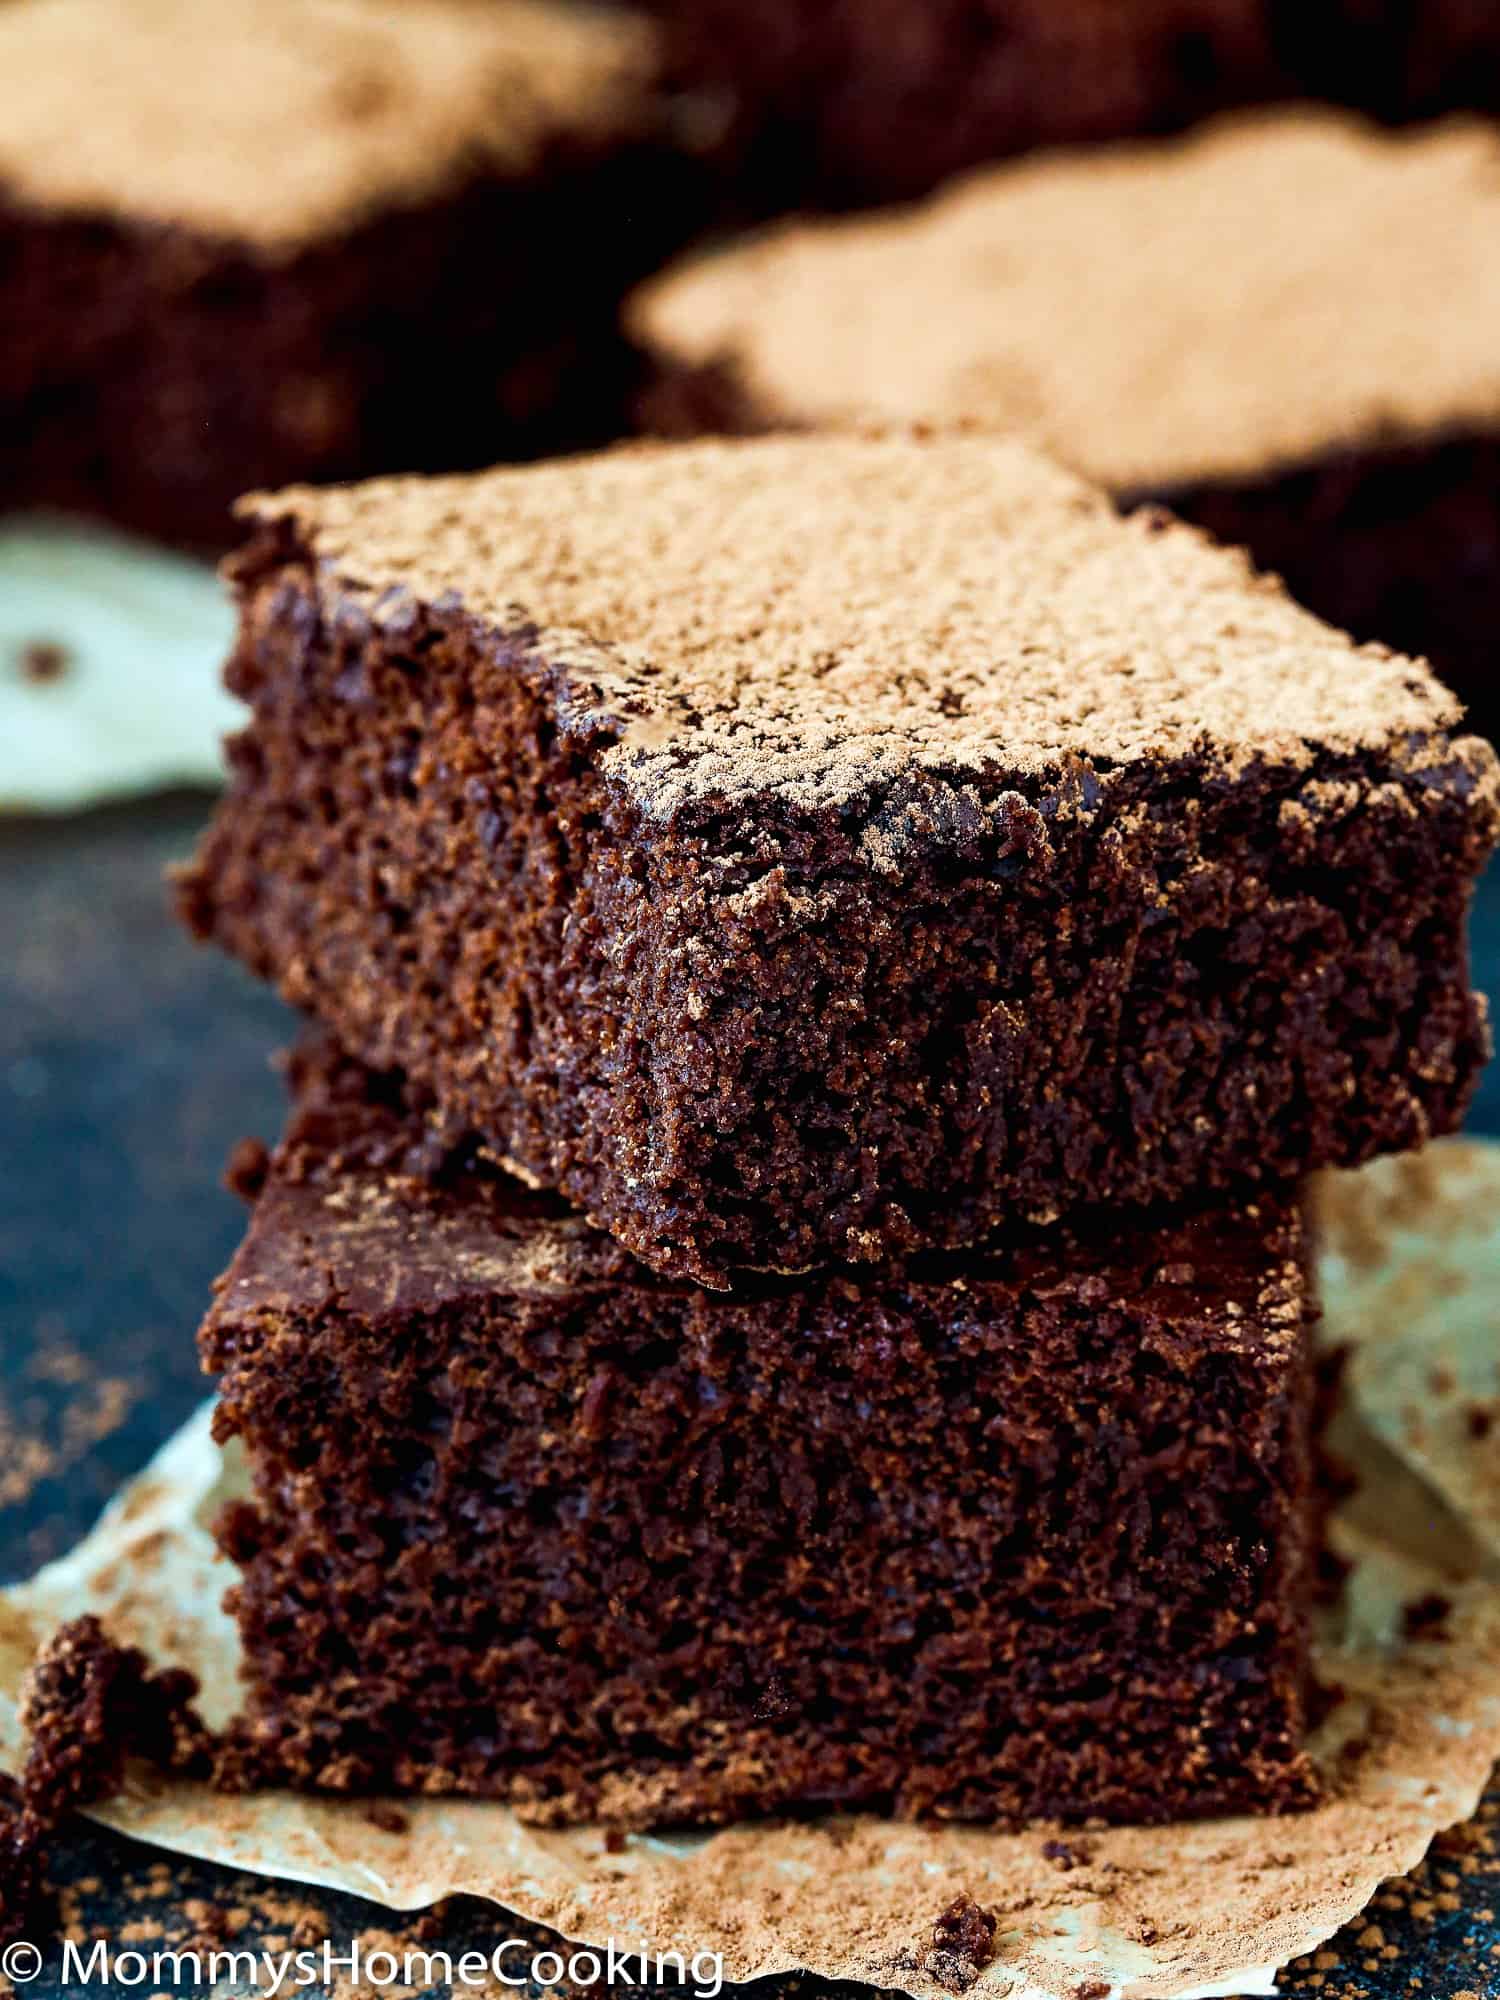 stack of two cakey brownies made with no eggs.